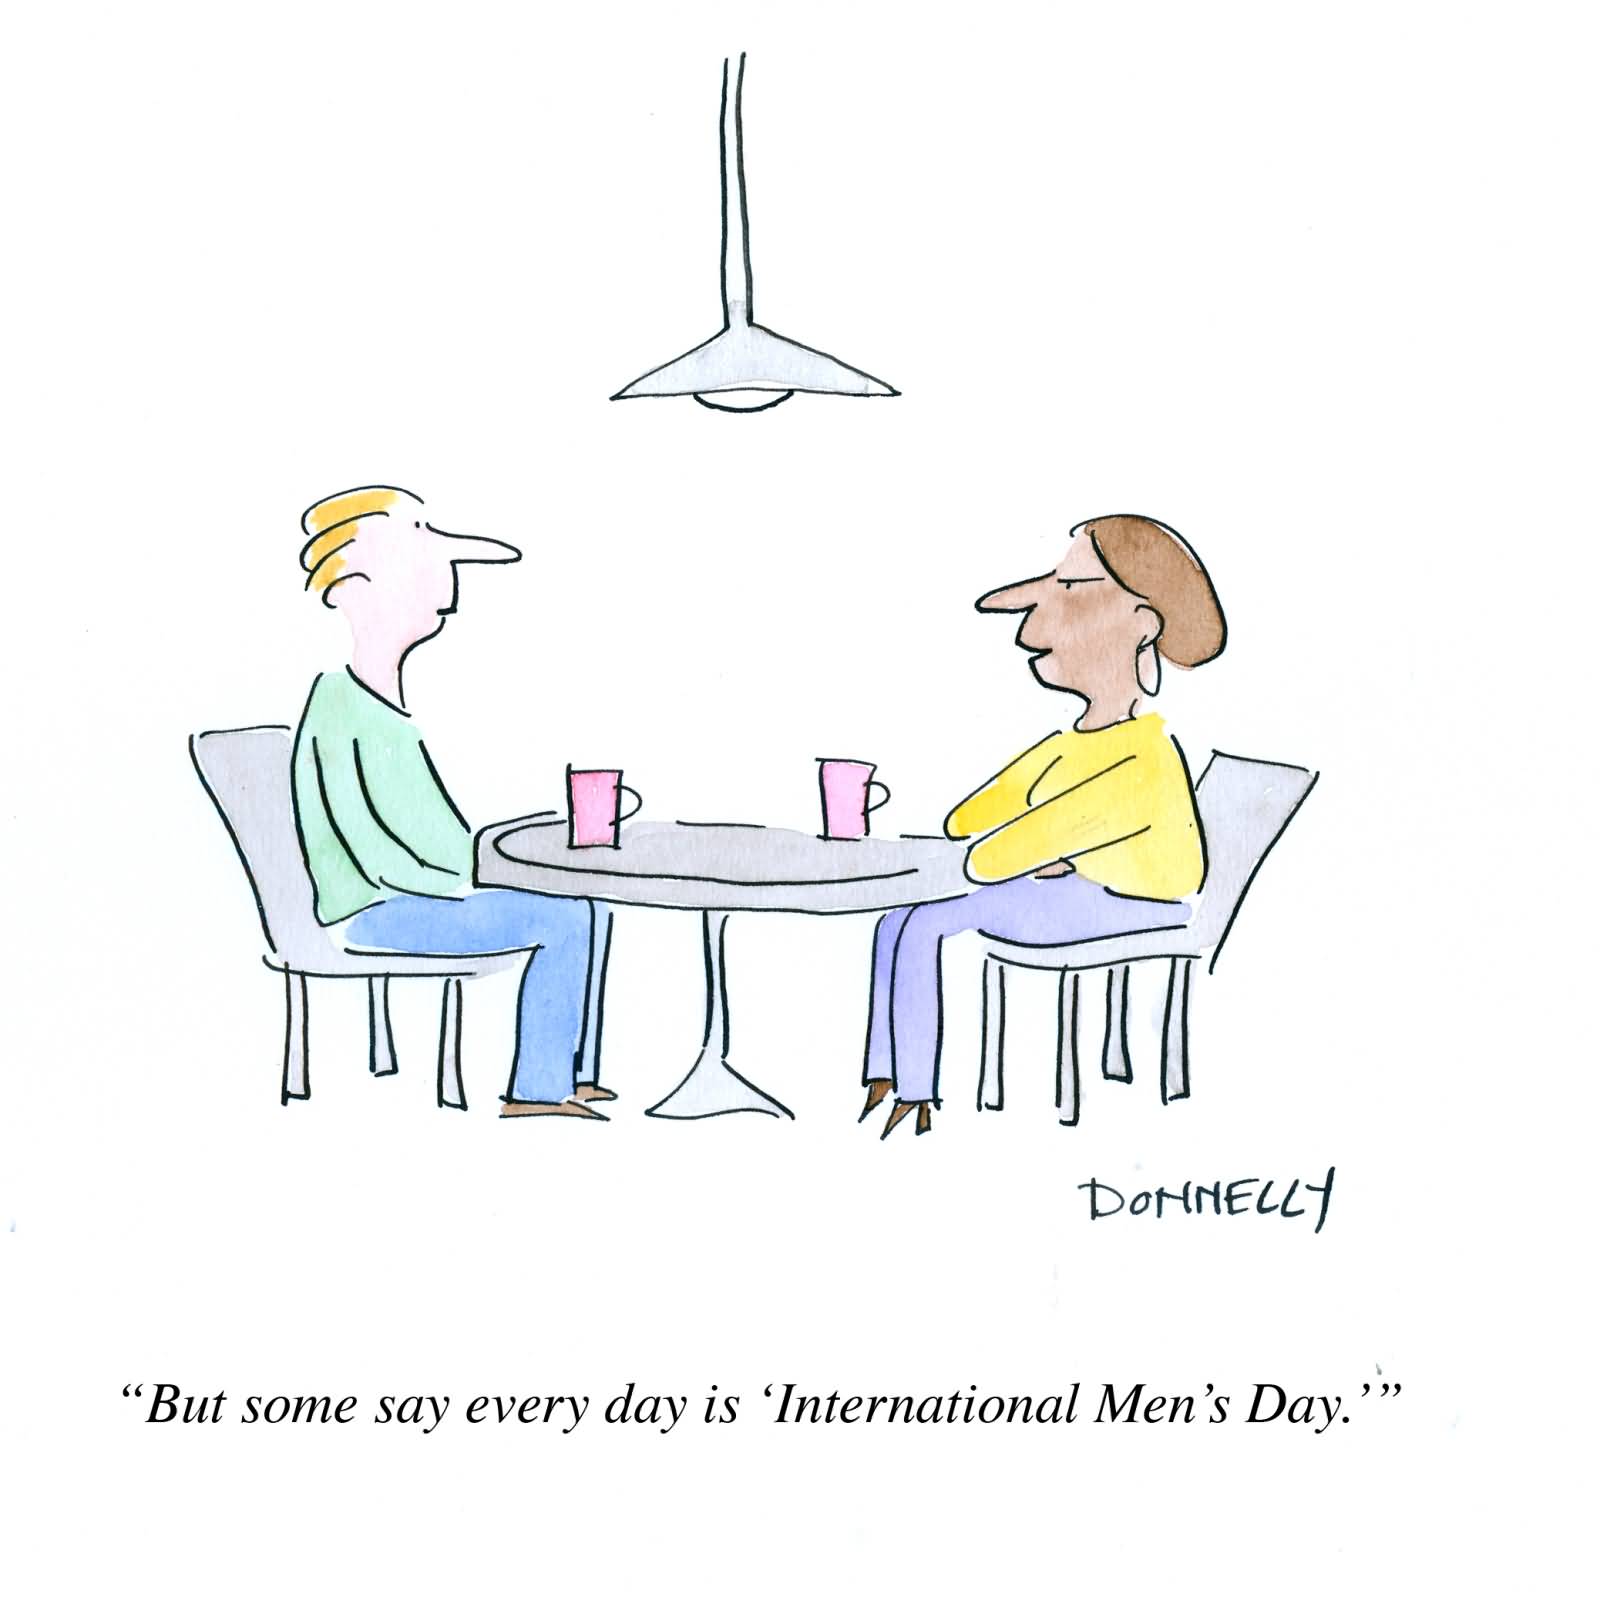 But some say every day International Men’s Day